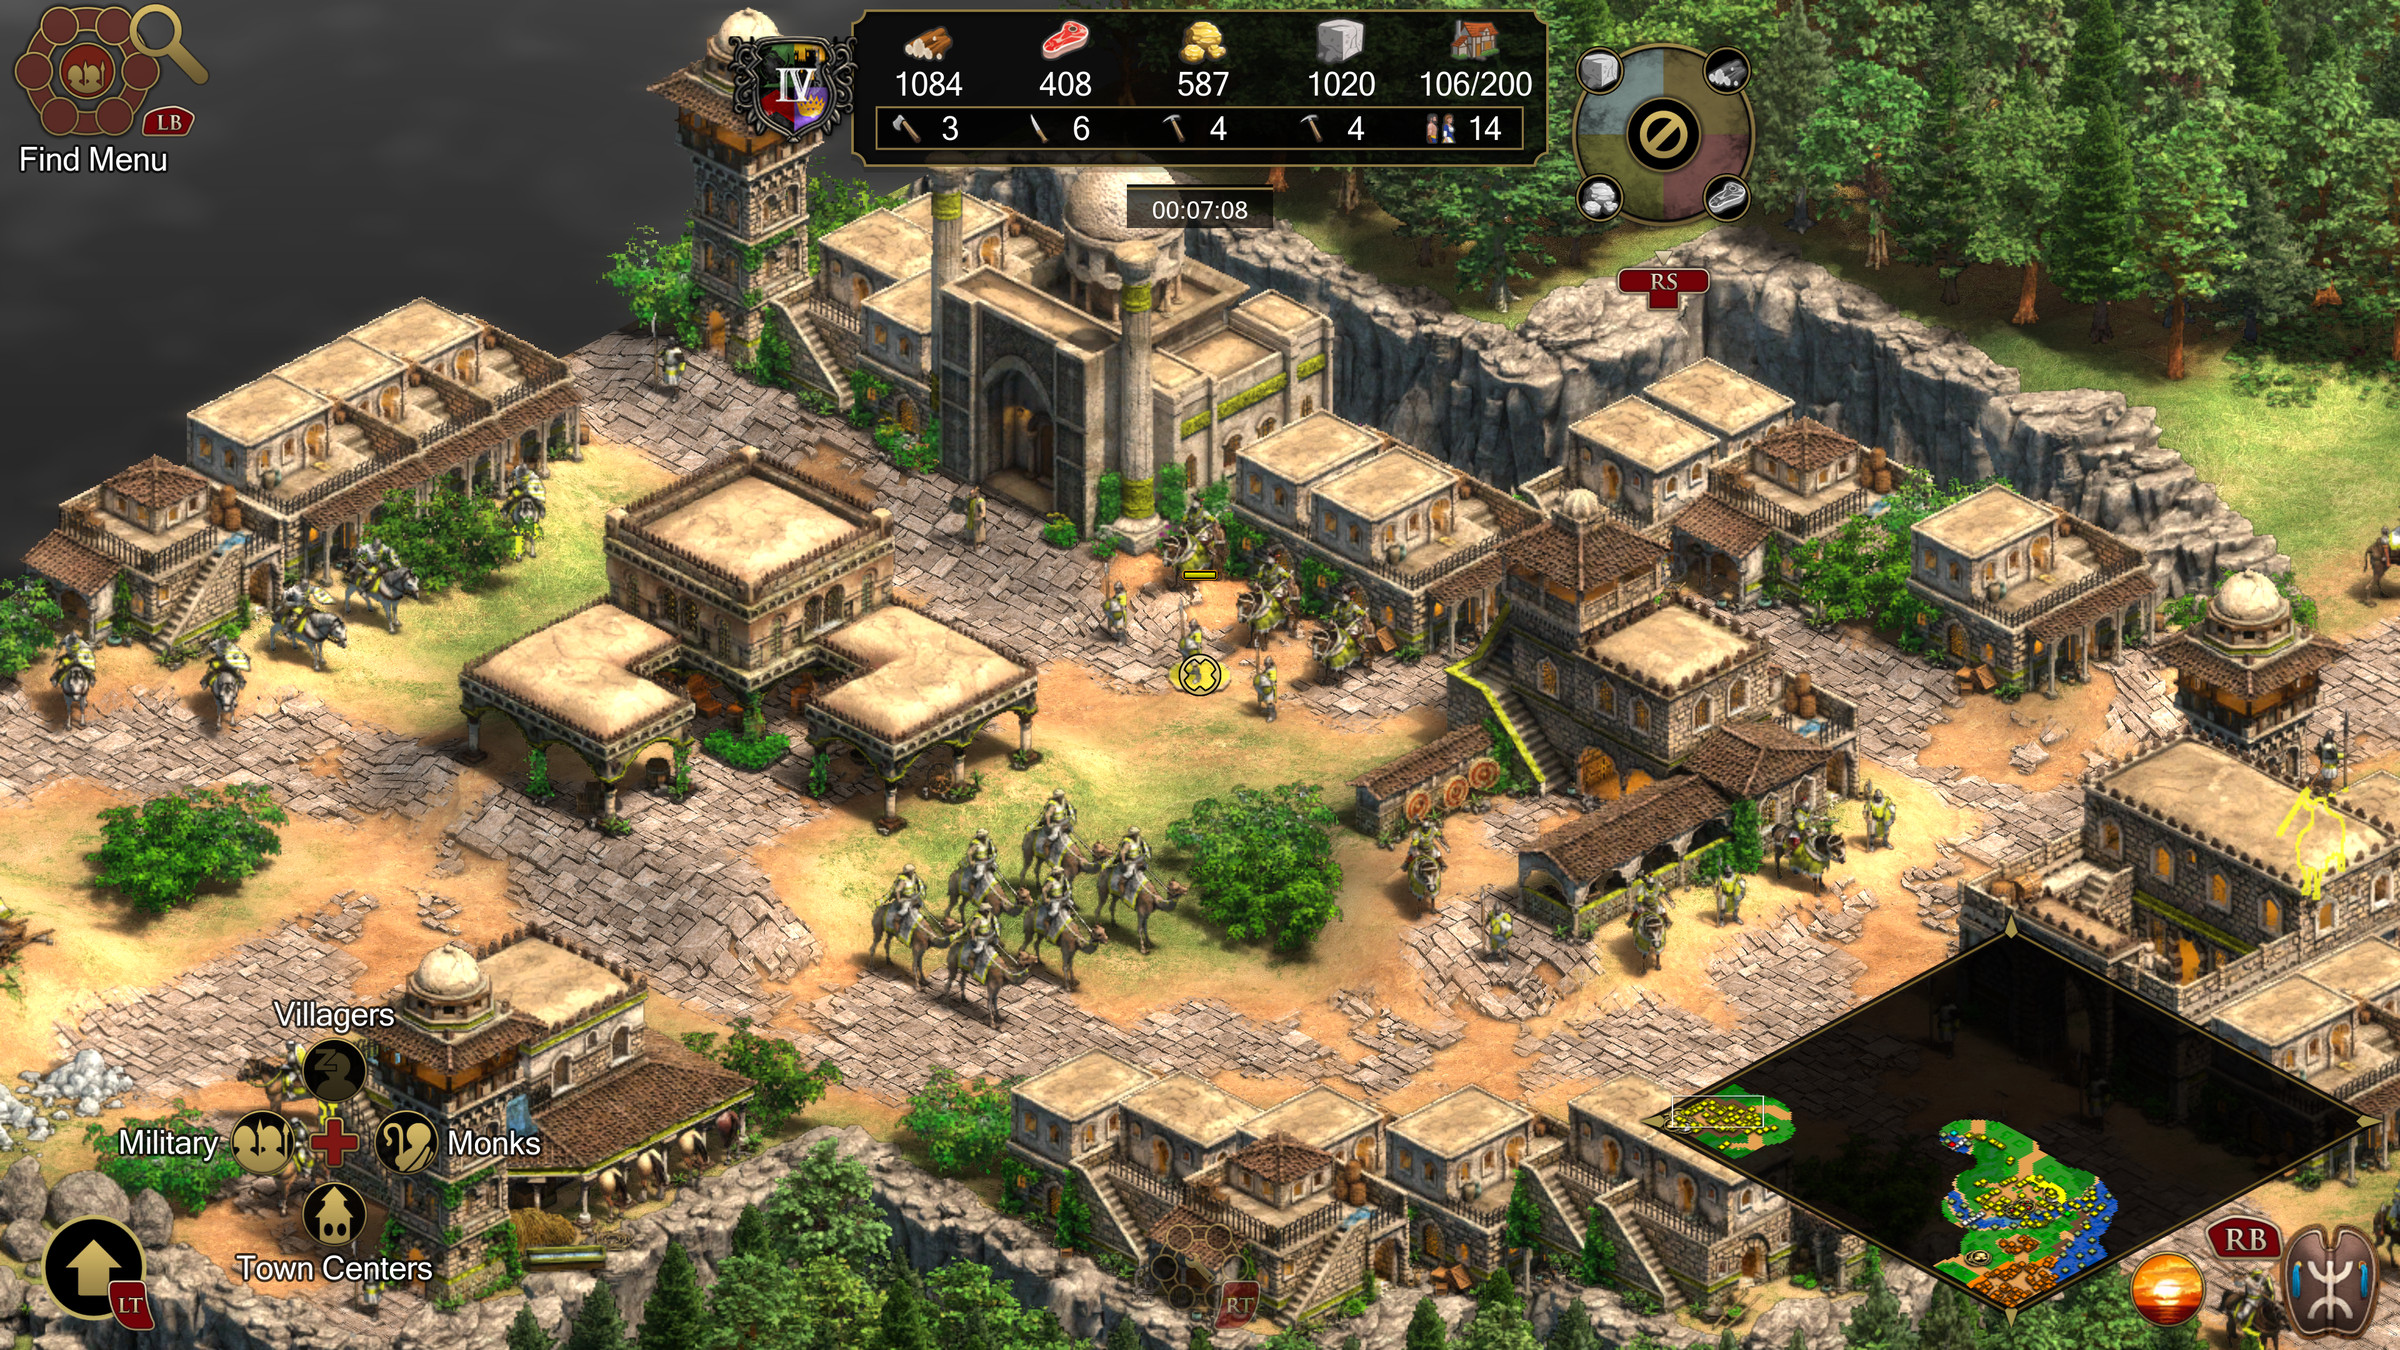 Screenshot from Age of Empires II: Definitive Edition featuring the Berber civilization.